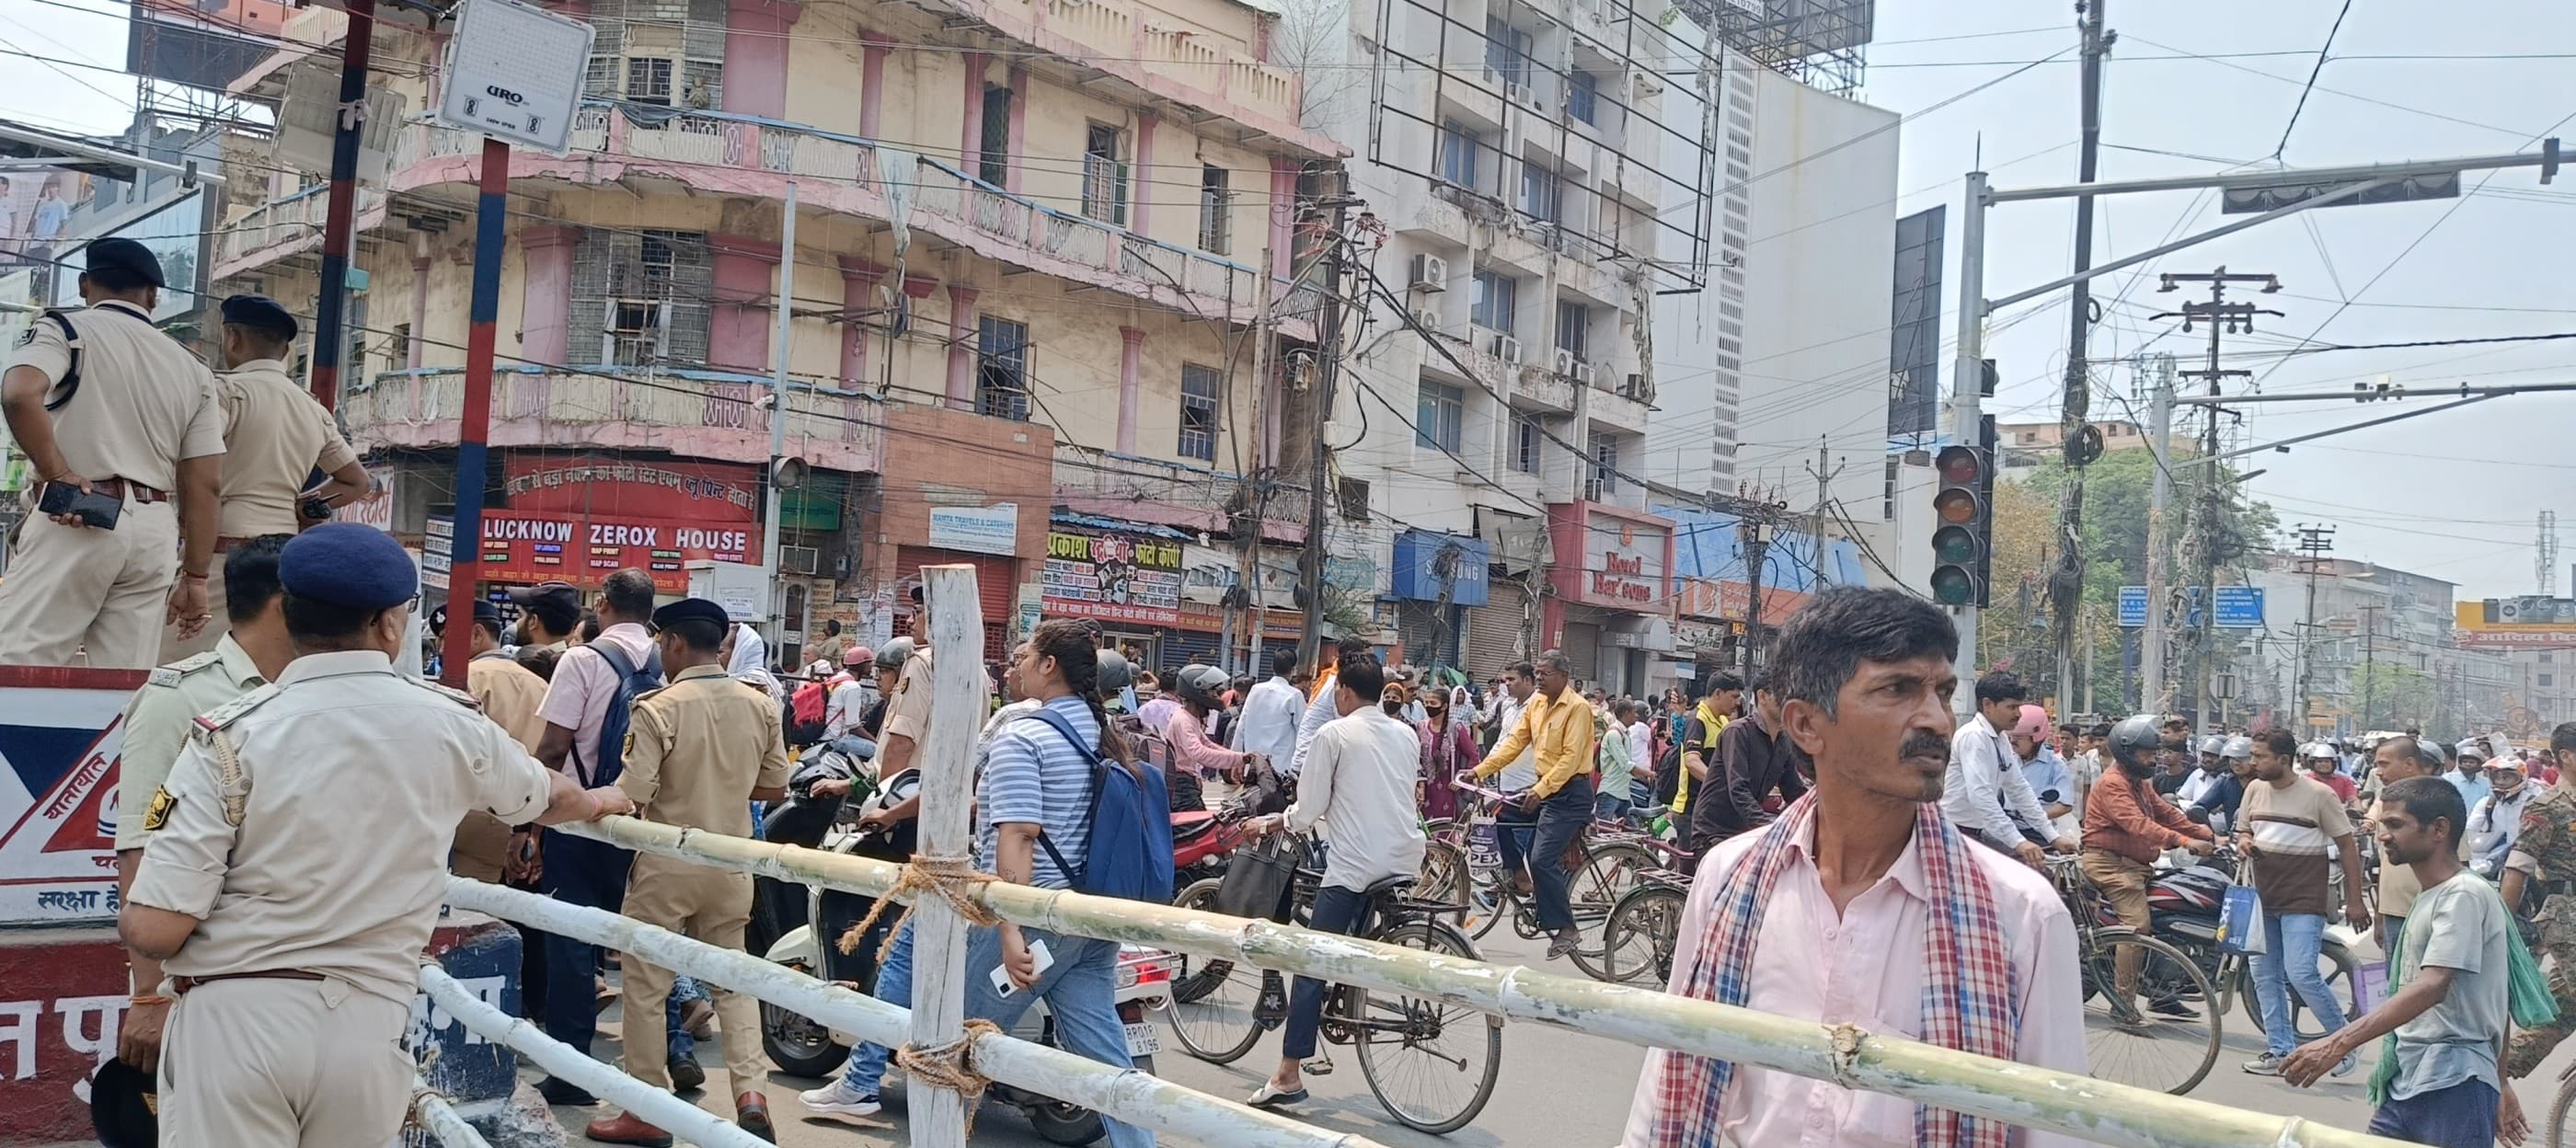 Patna residents wait for a road blockage at the Dak Bungalow Chouraha to be lifted so they can go about their daily lives. (Image Credit: Prabhav Anand)